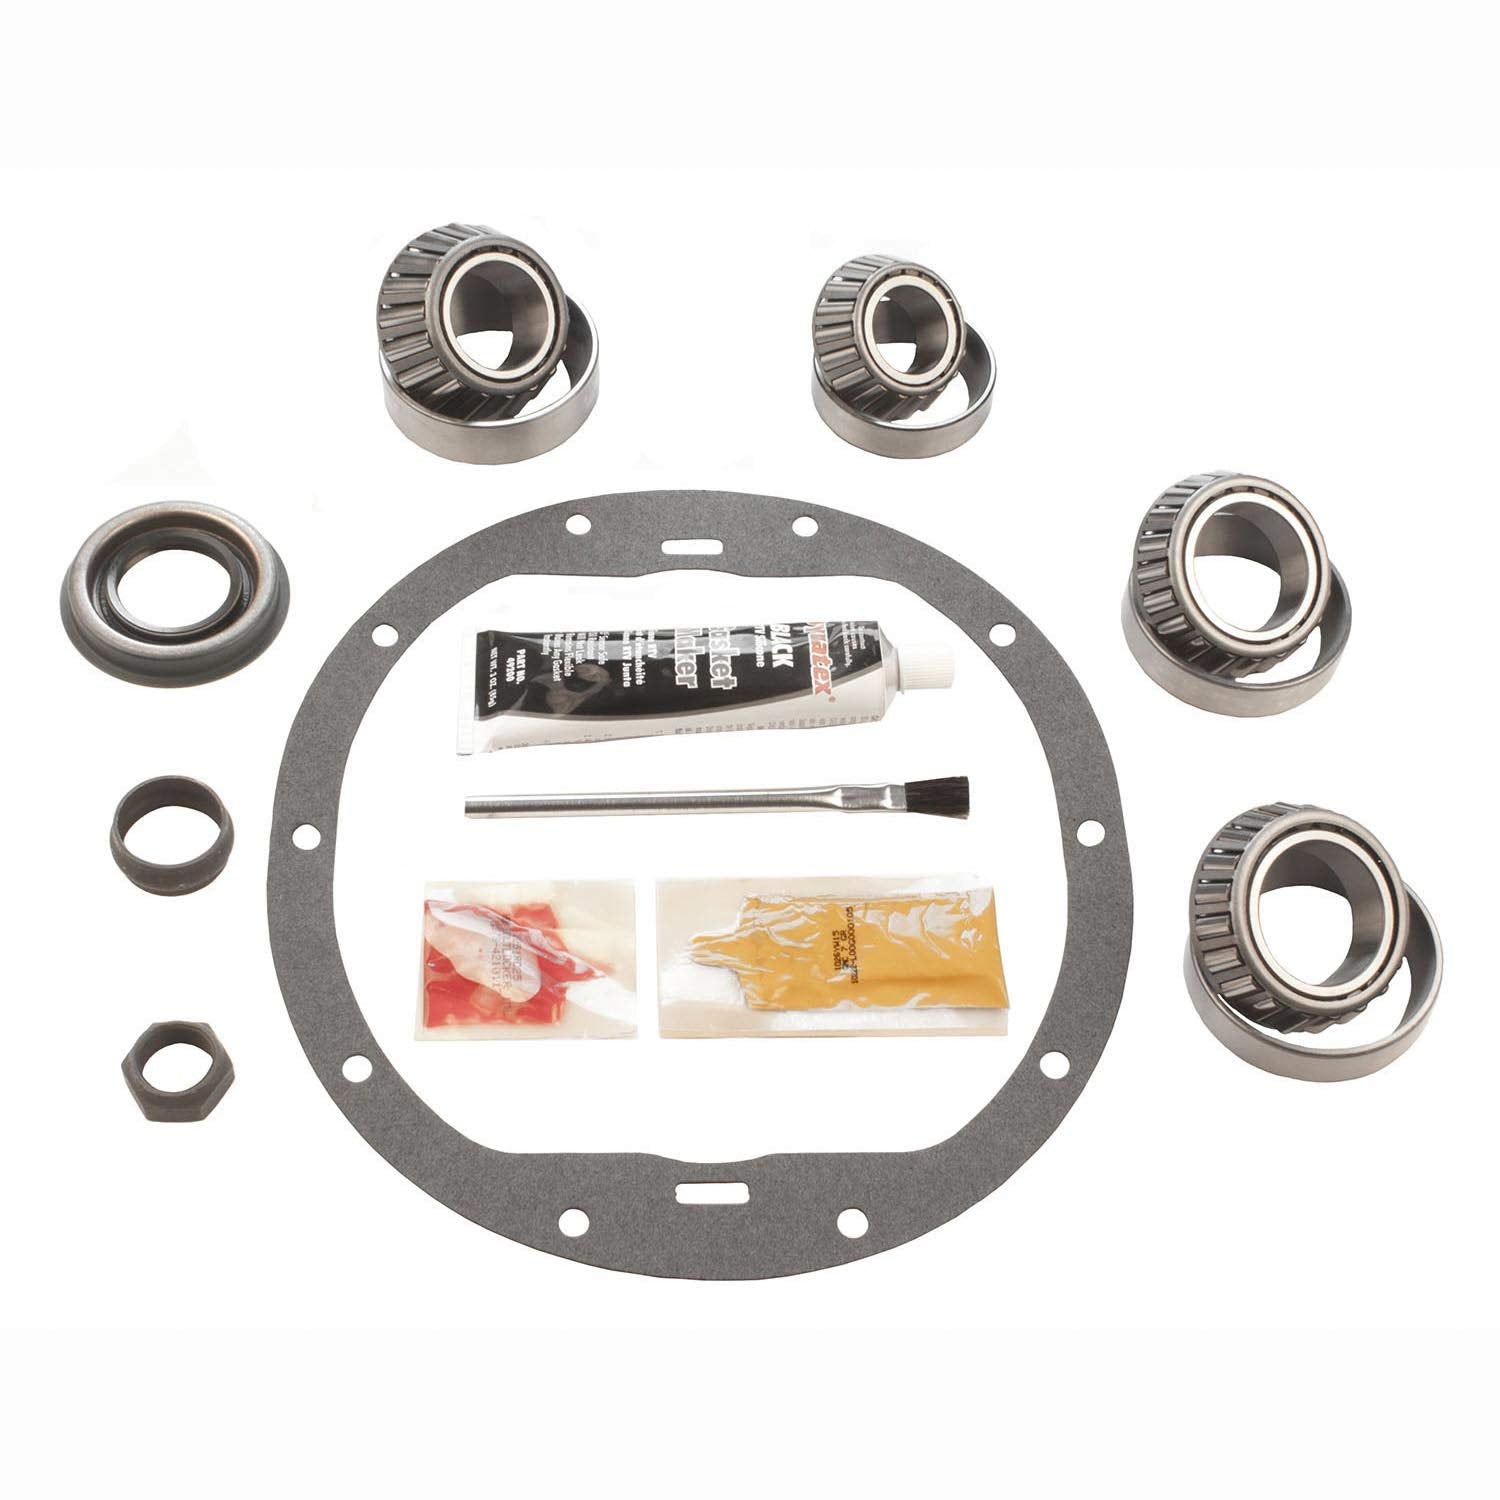 Motive Gear R10CR Differential Bearing Kit